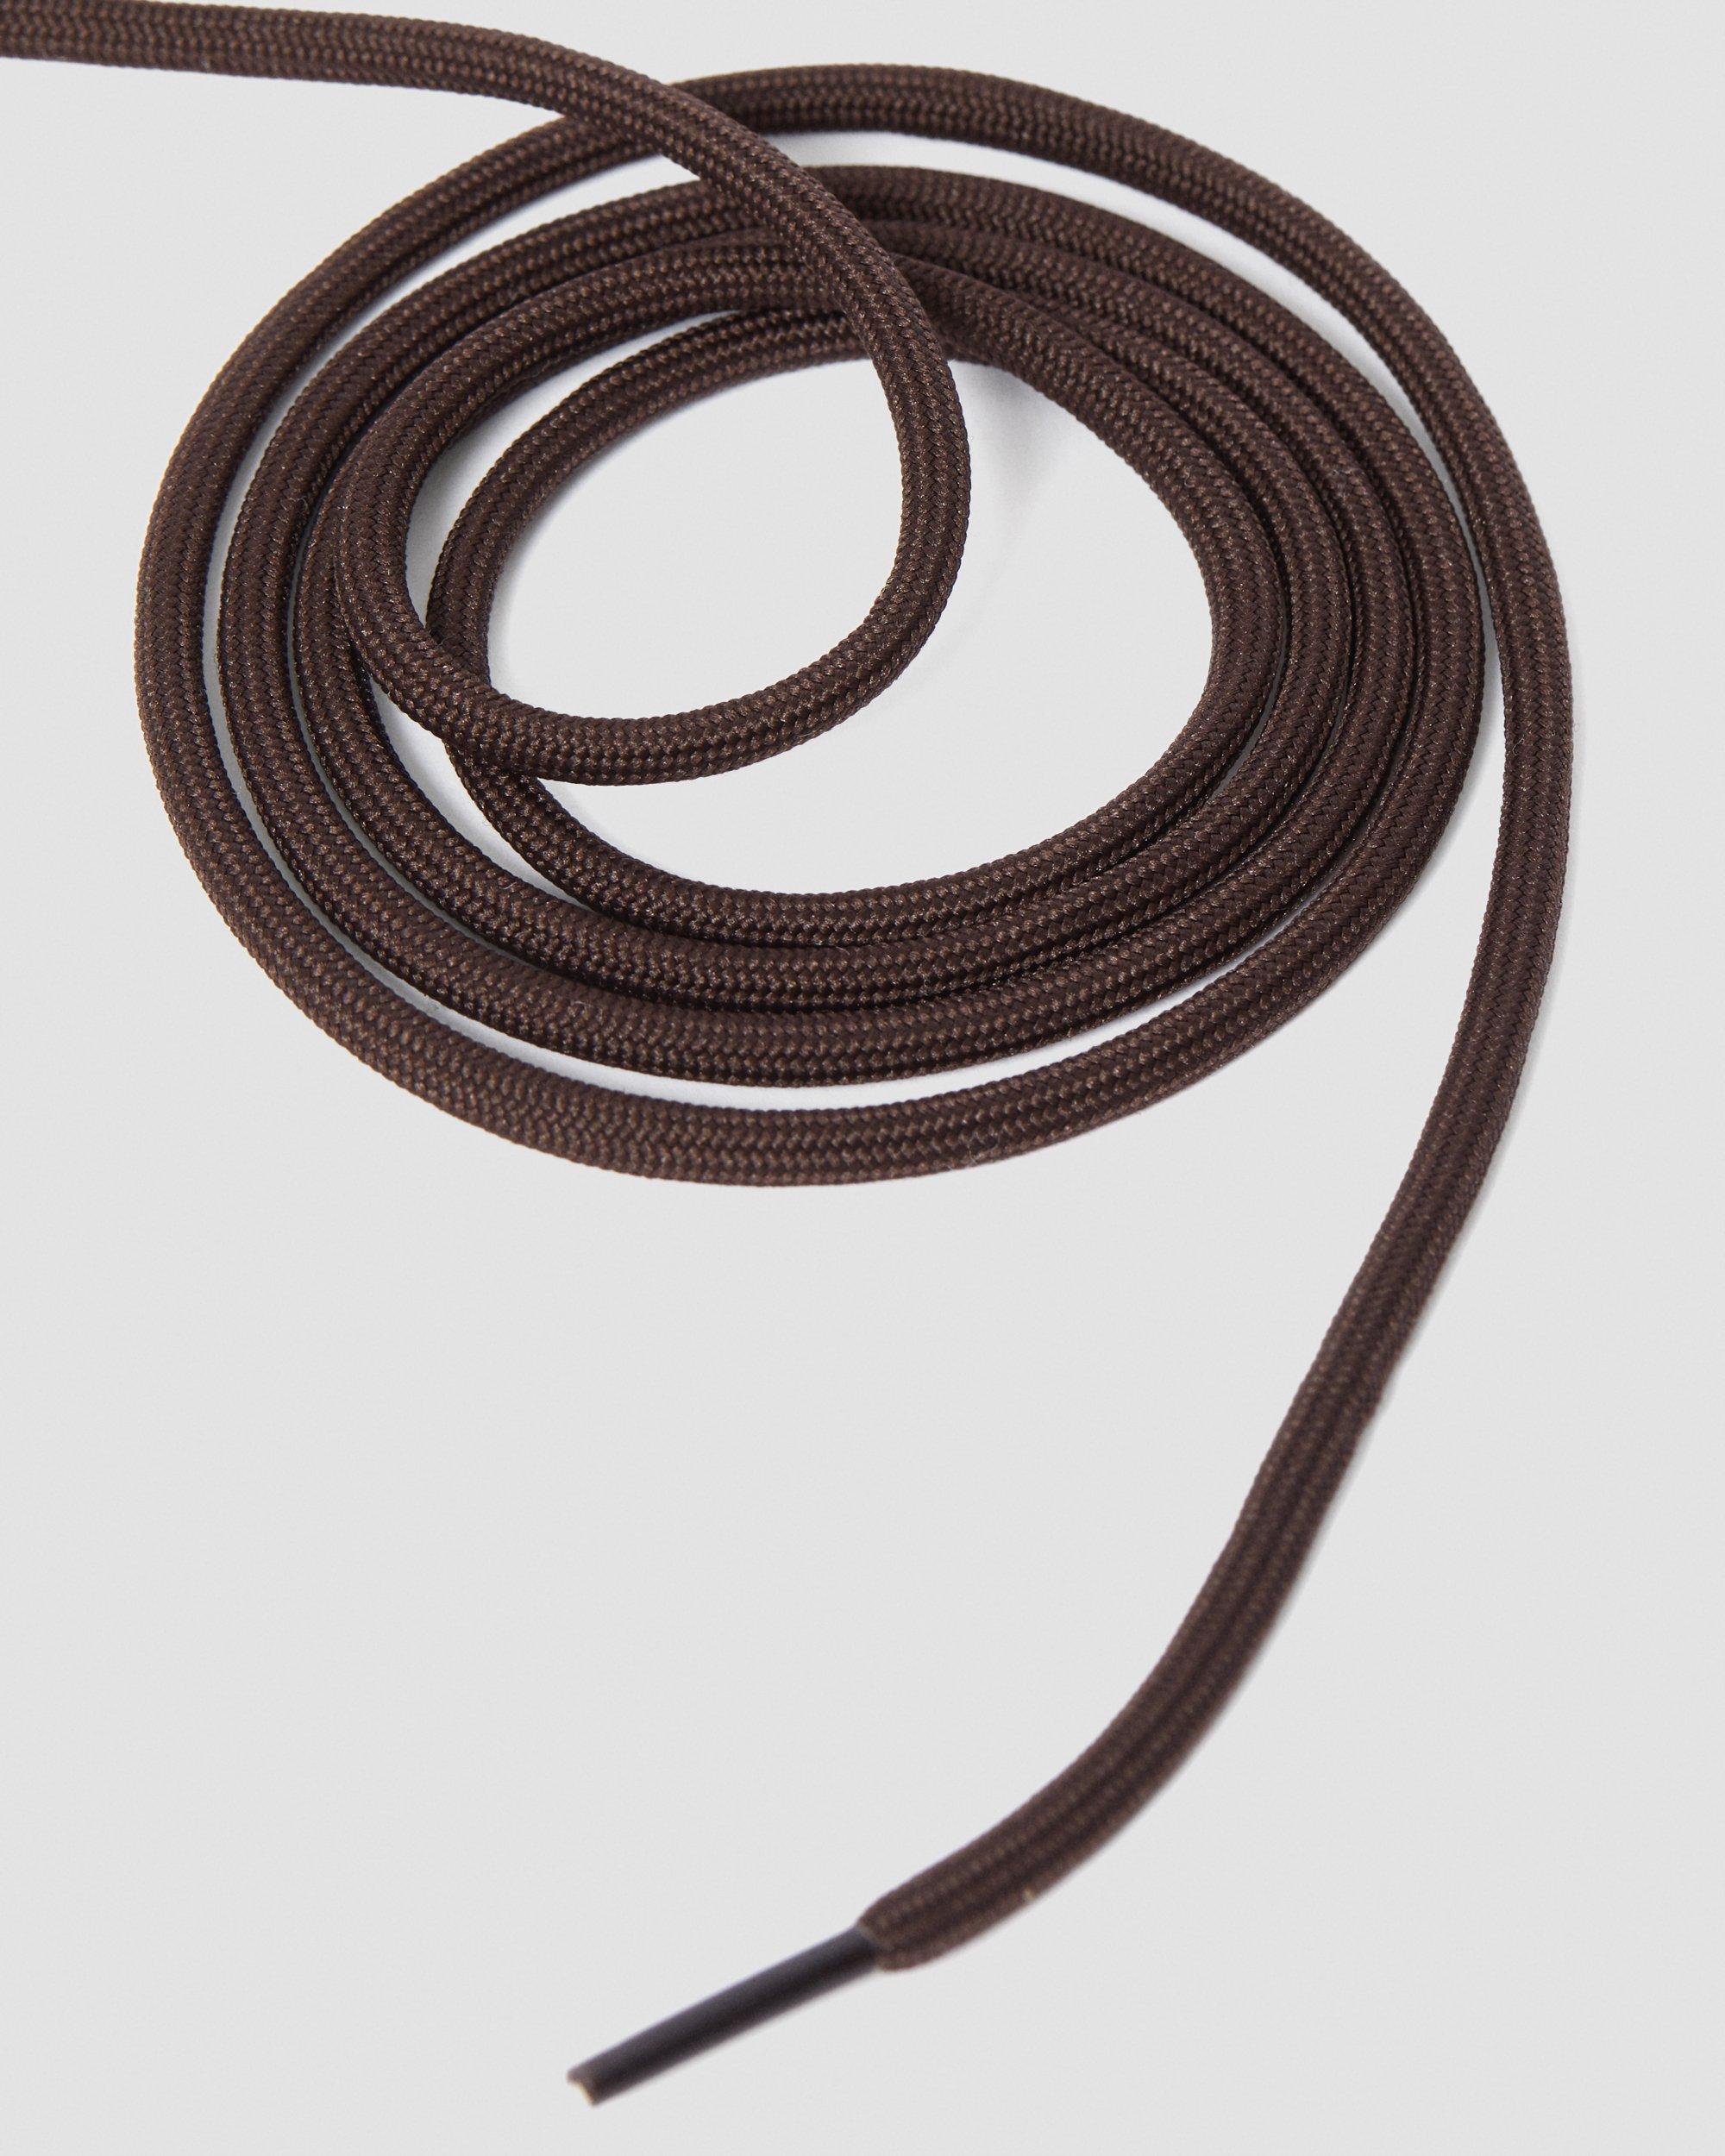 55 Inch Round Shoe Laces (8-10 Eye) in Brown